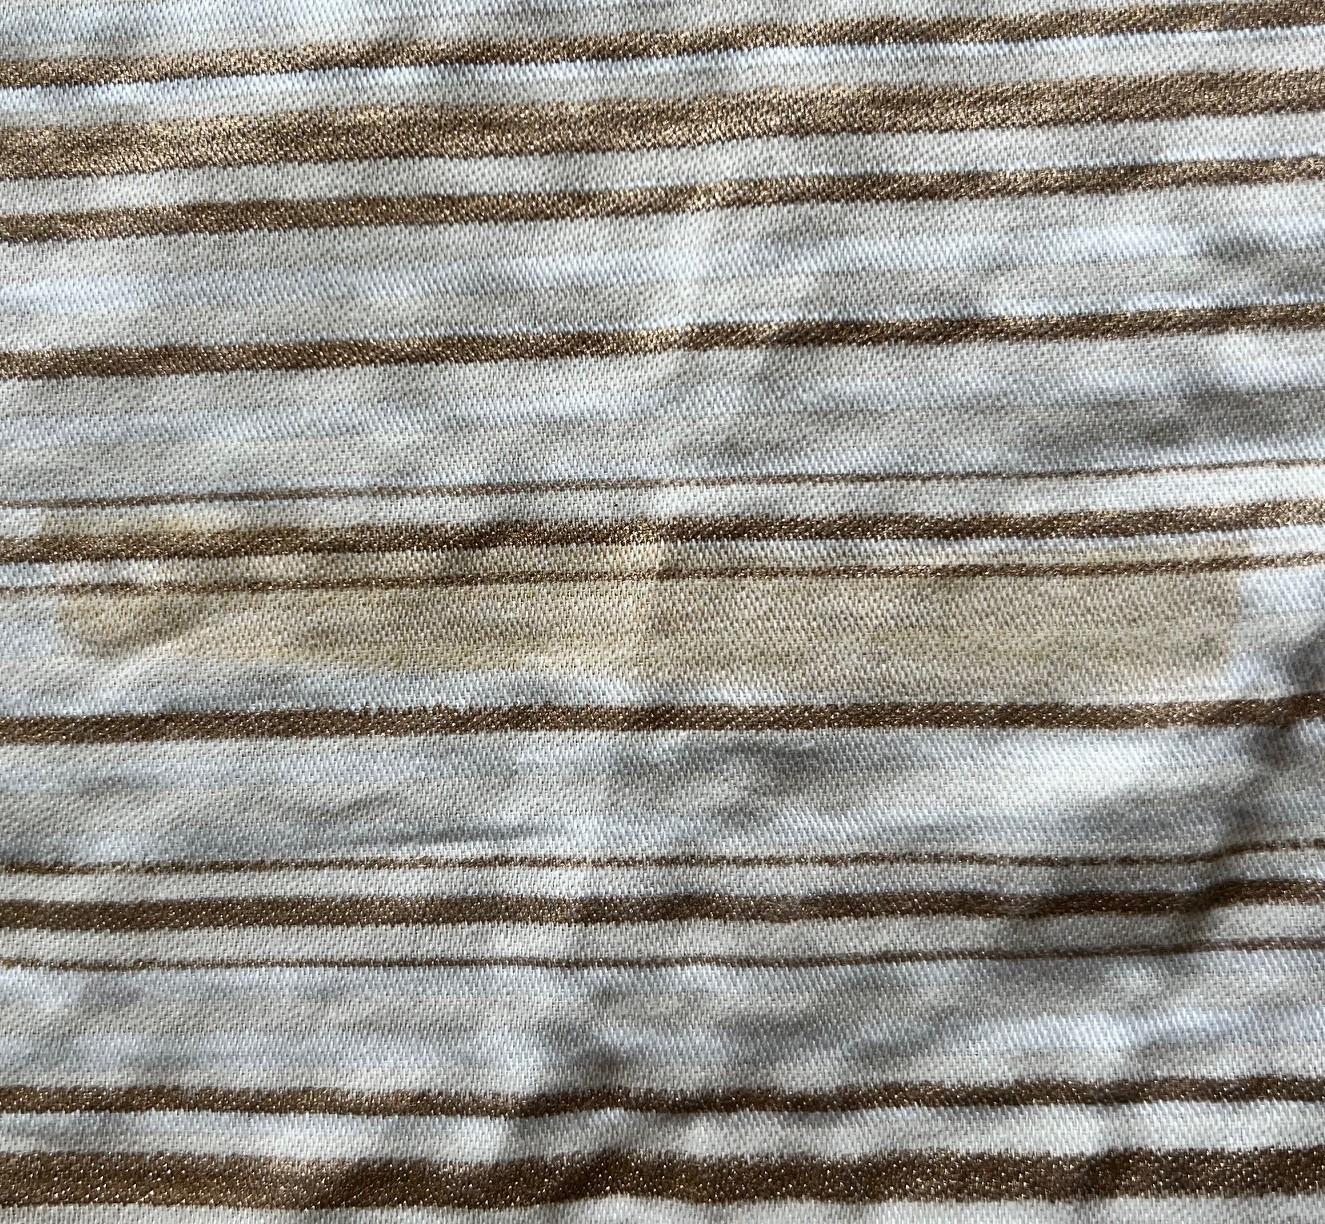 Venetian Fortuny Malmaison Fabric in String and Gold Stripes on Ivory, 28 Yards For Sale 1